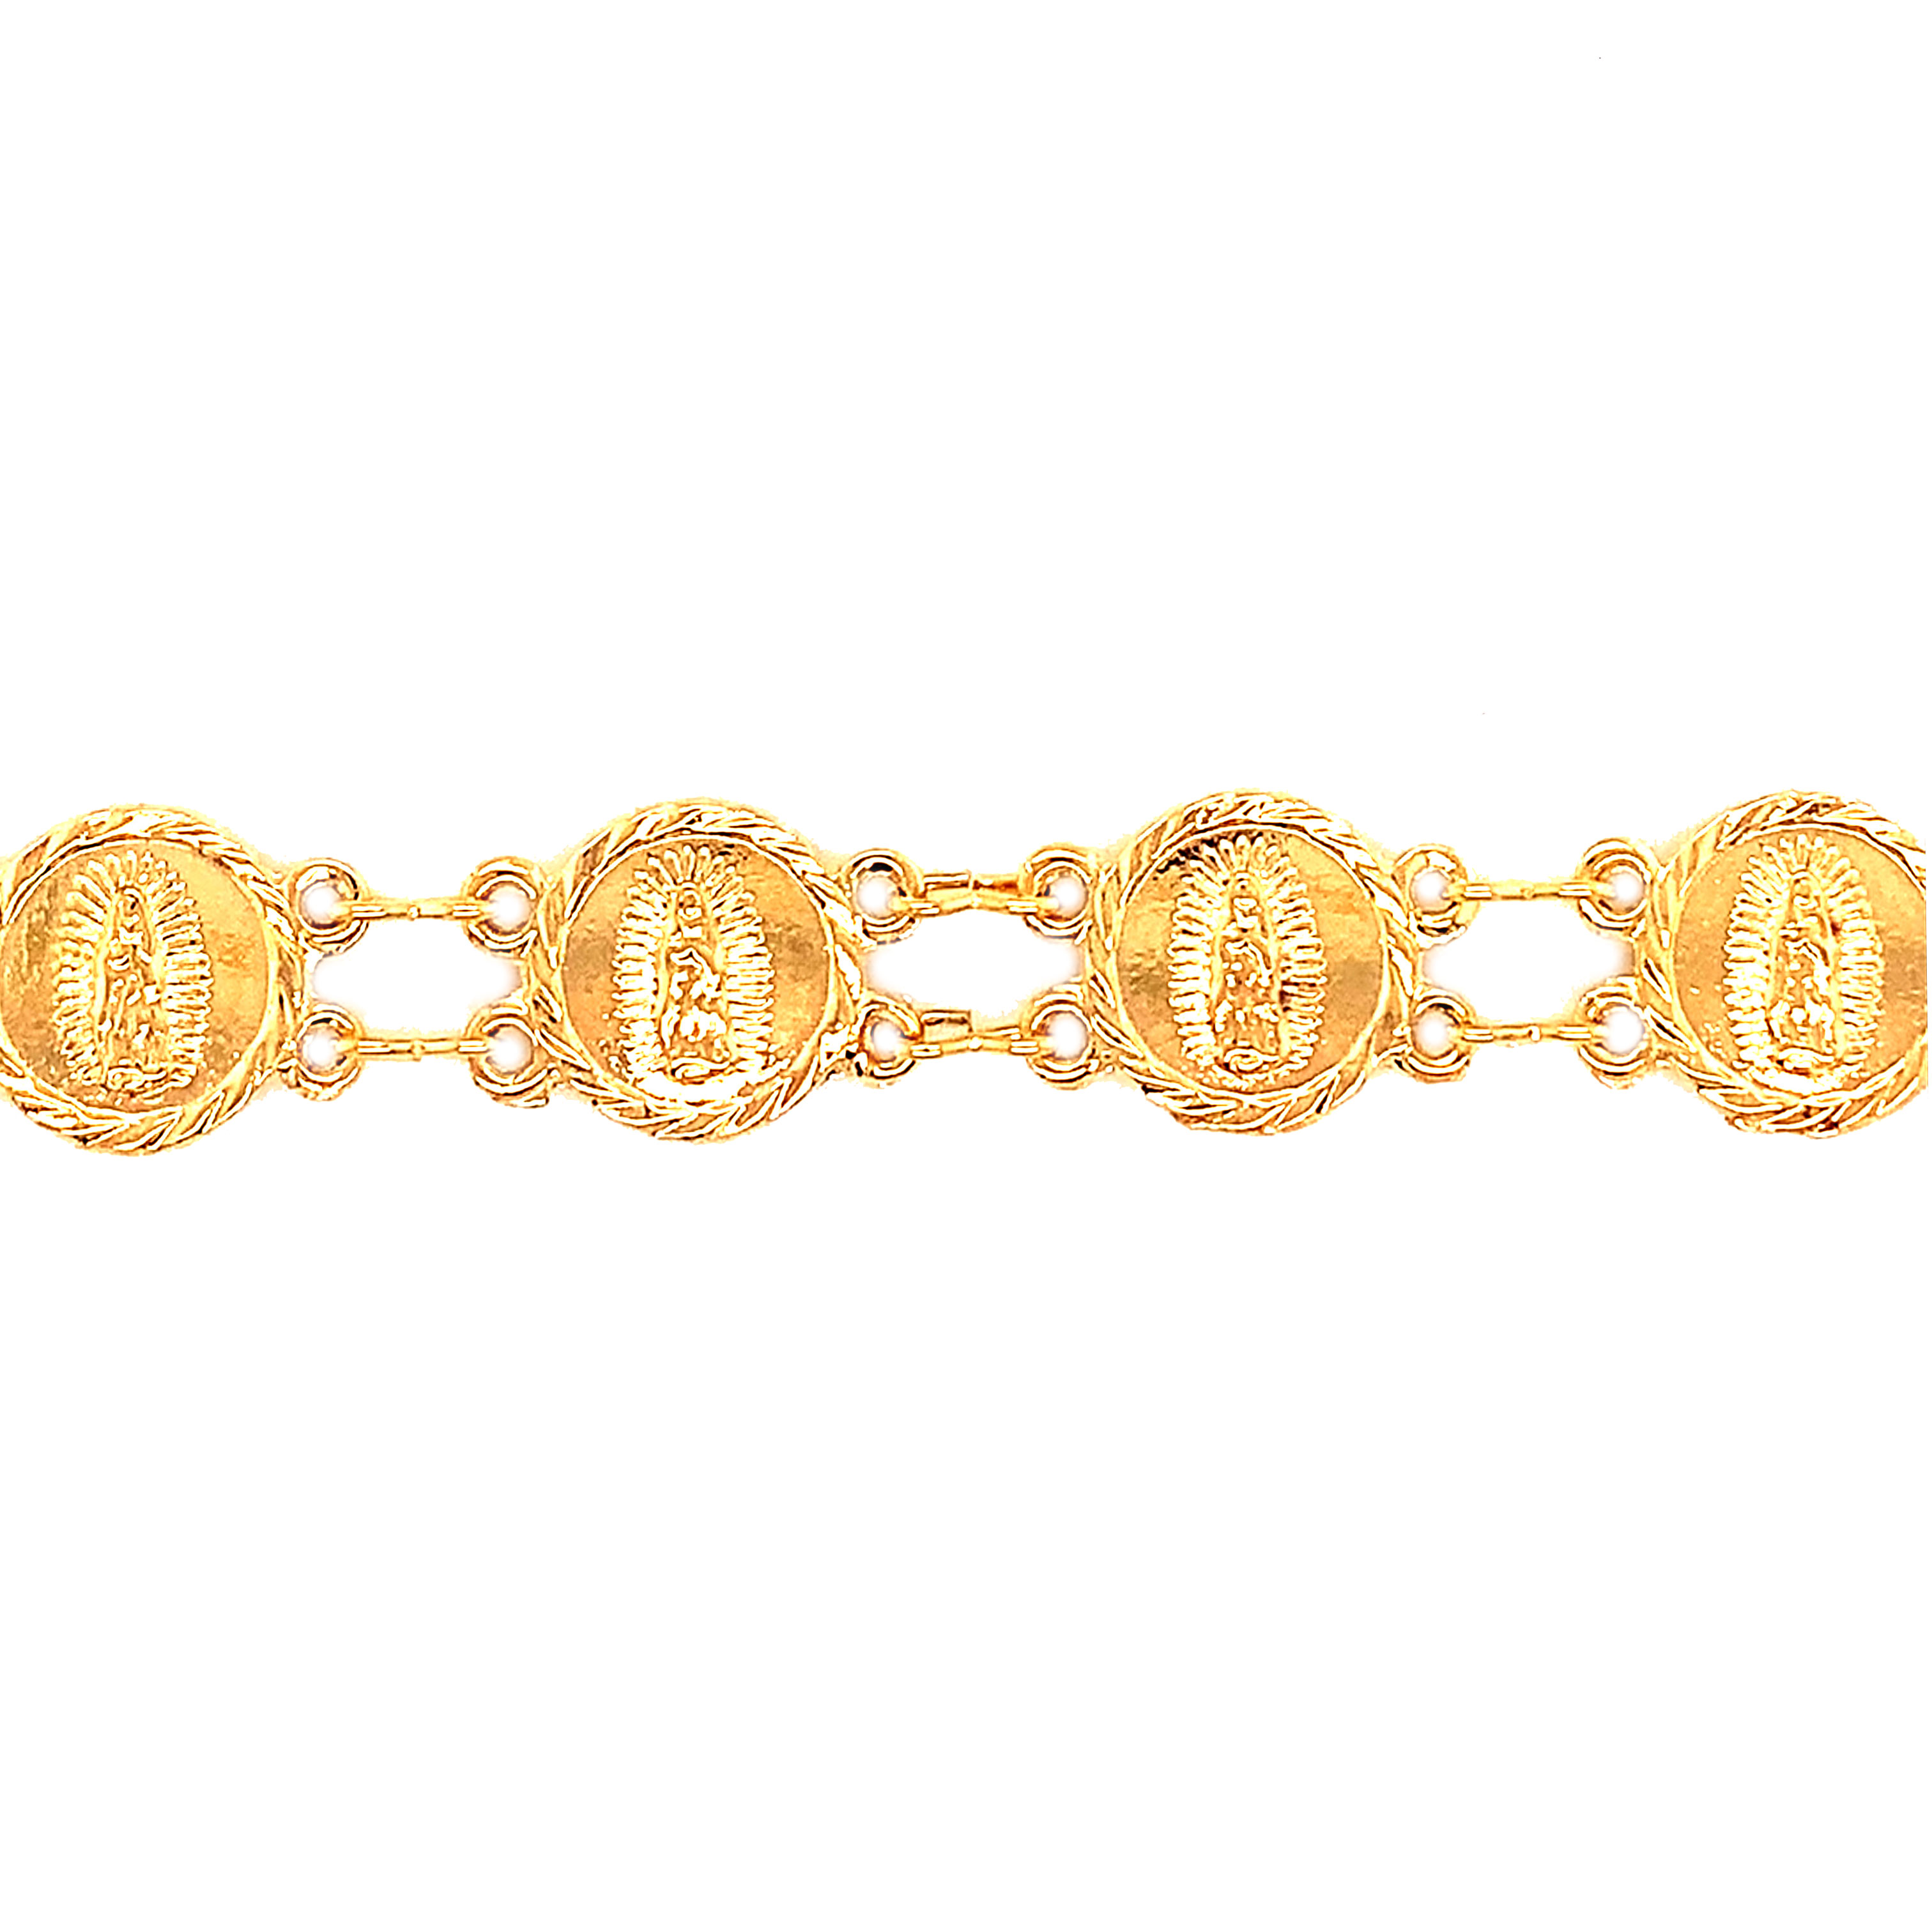 Our Lady of Guadalupe Bracelet - Gold Filled